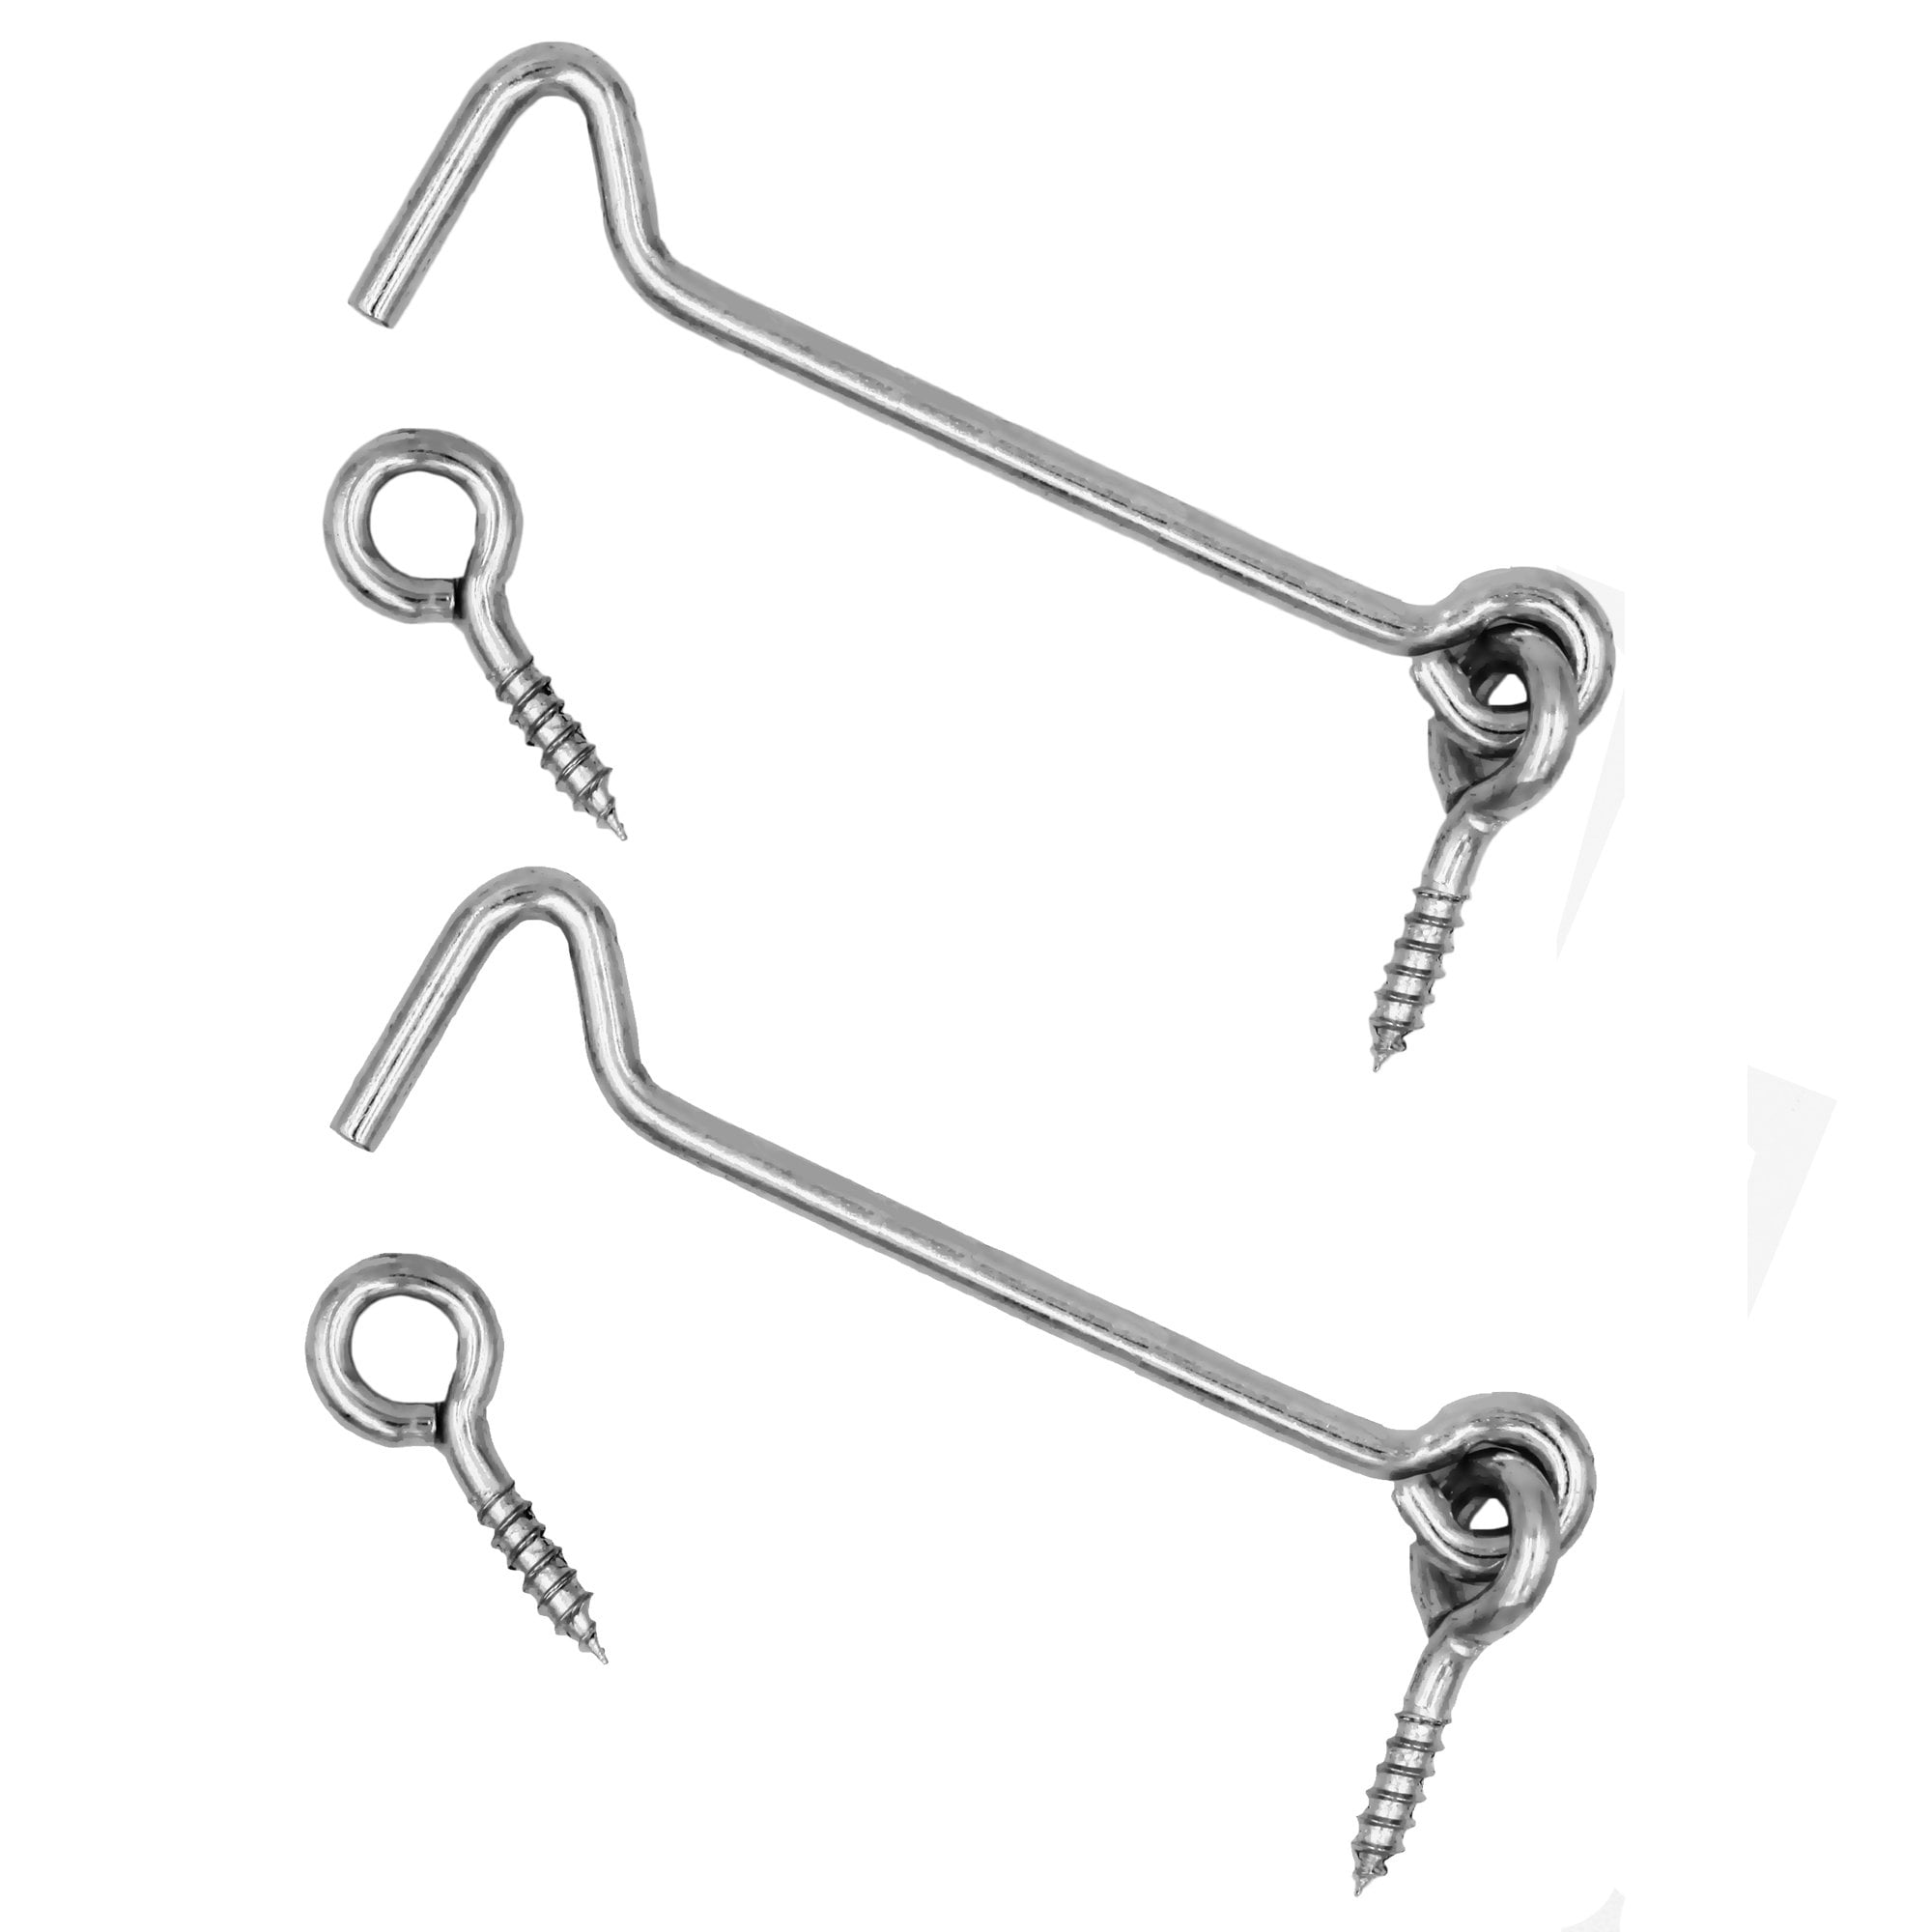 Wideskall 5 inch Heavy Duty Zinc Plated Wire Gate Hook and Eye Latch (Pack of 2)